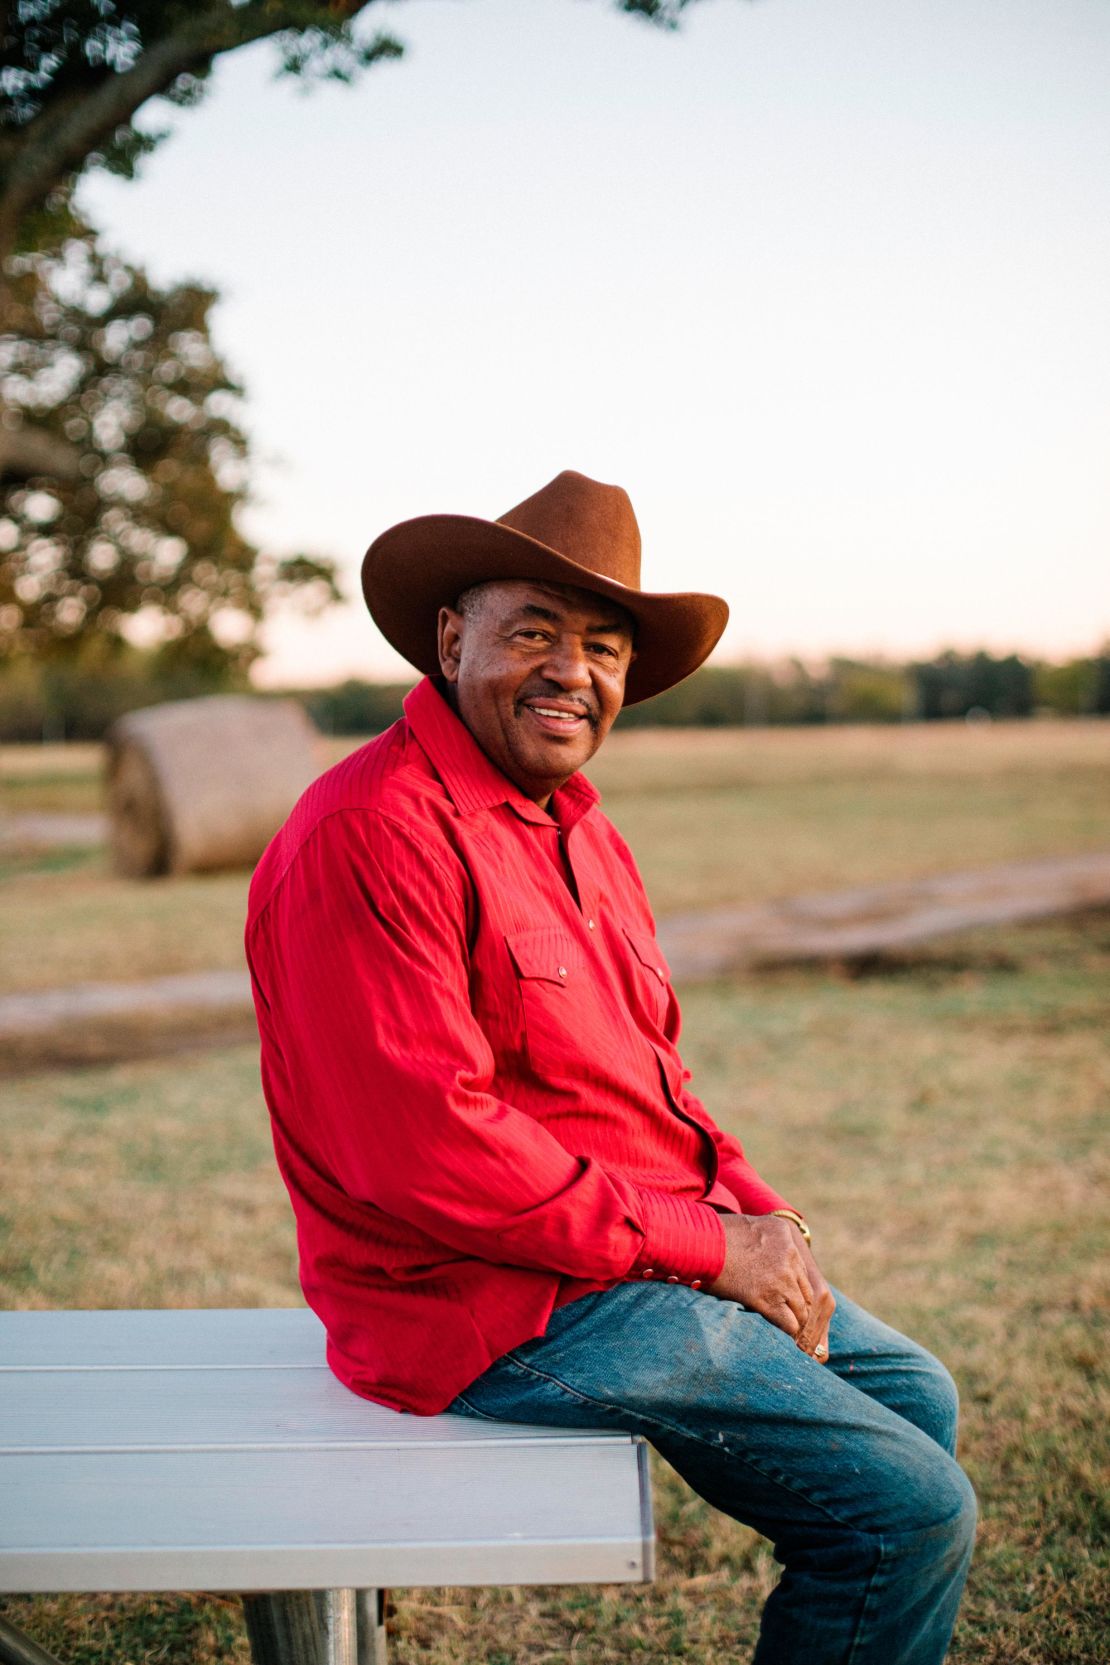 George Roberts is one of the farmers profiled in "United Shades of America."